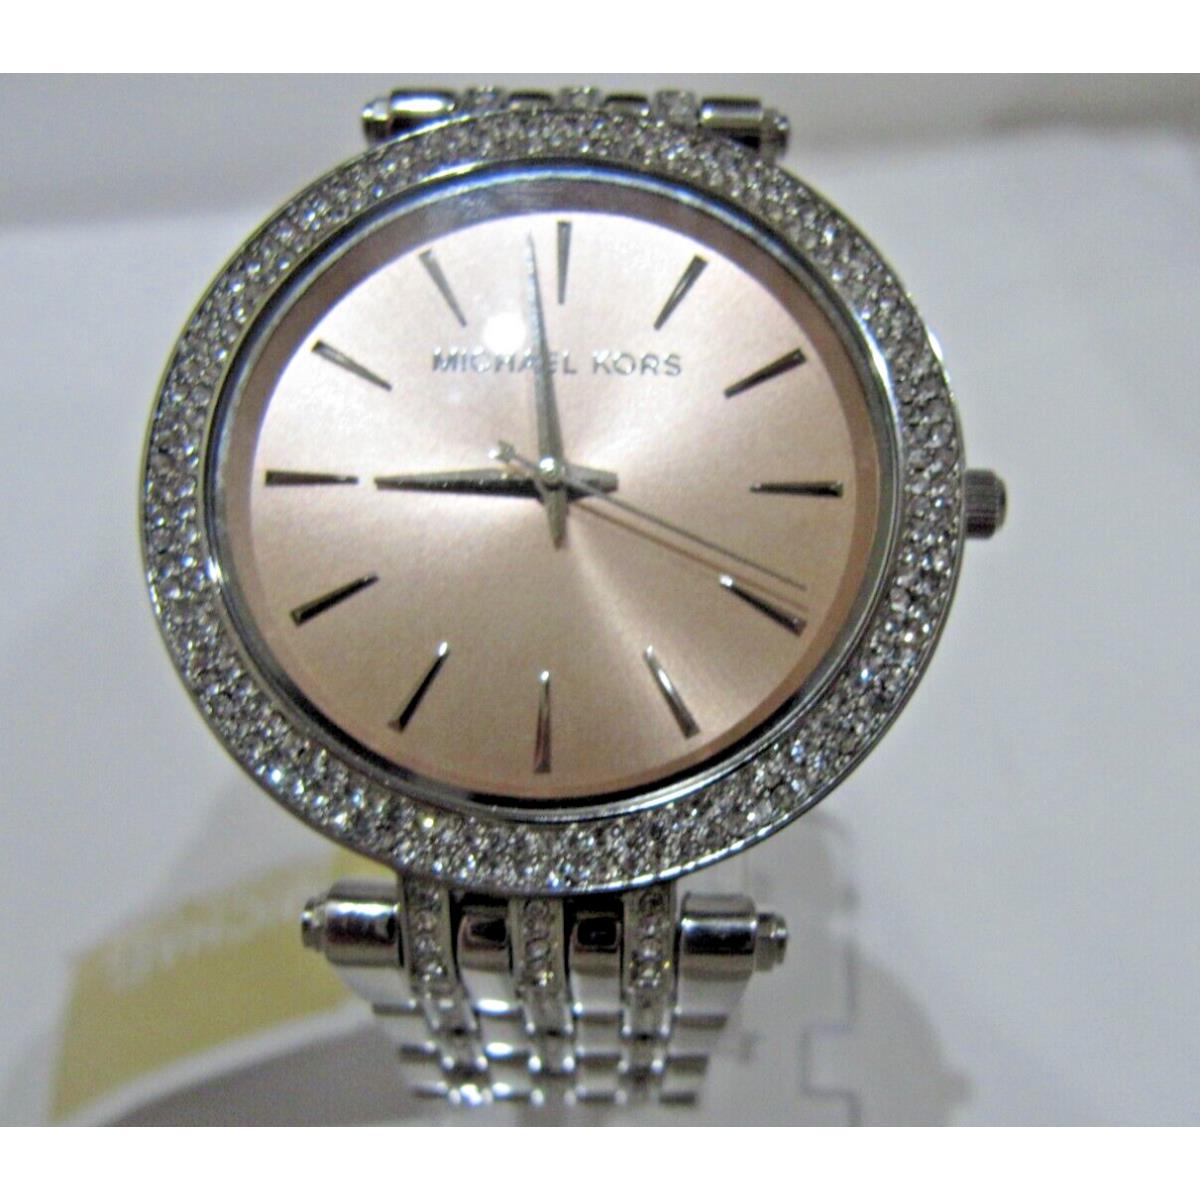 Michael Kors watch Darci - Pink Face, Pink Dial, Silver Band 4